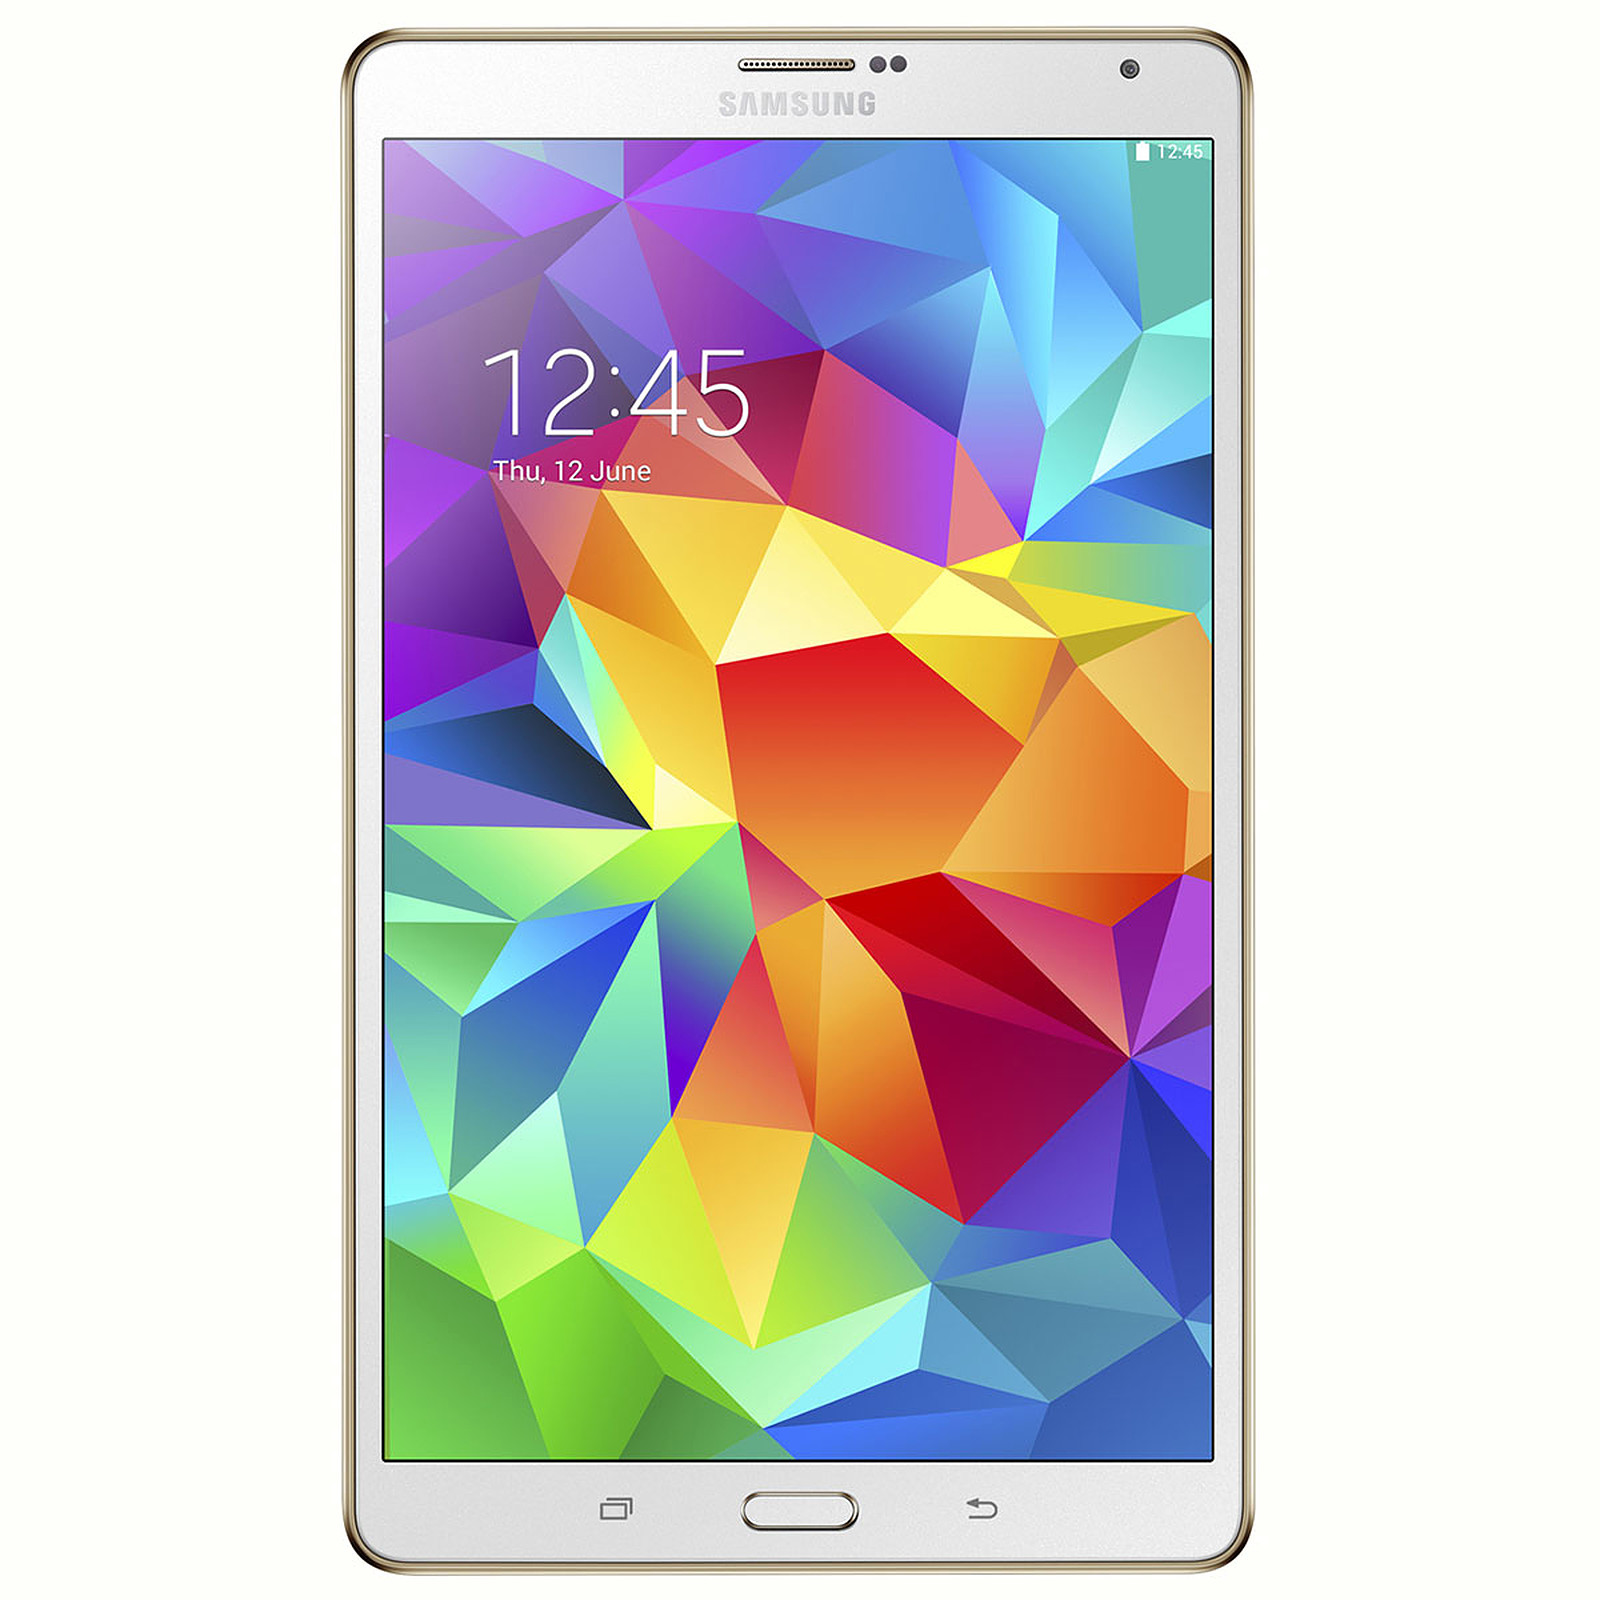 Samsung Galaxy Tab 4 7" SM-T230 8 Go Blanc · Reconditionne - Tablette tactile Samsung